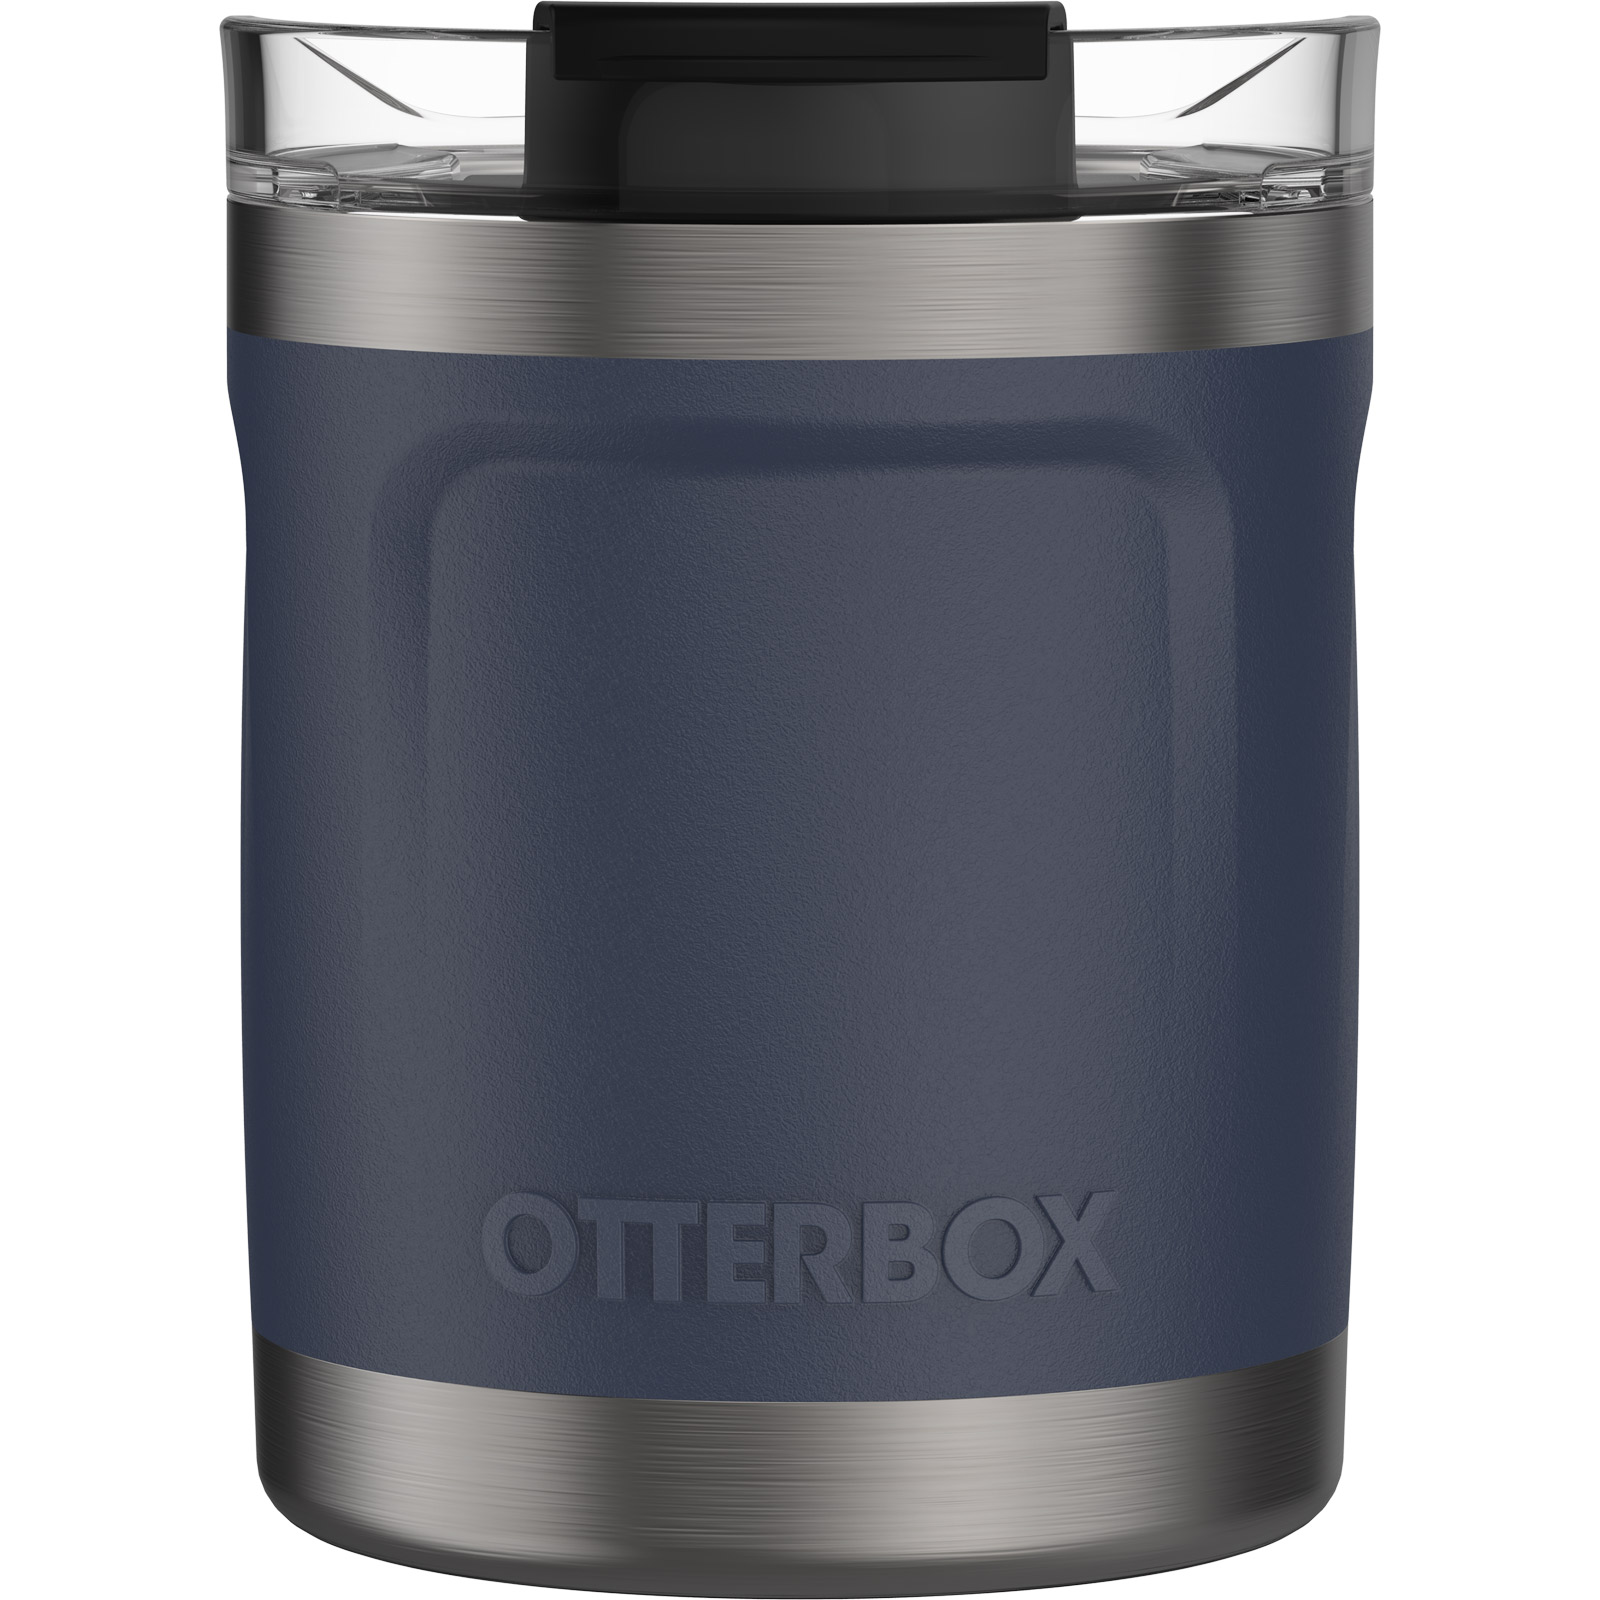 OtterBox Elevation Tumbler with Closed Lid - 10oz - Blue Steel